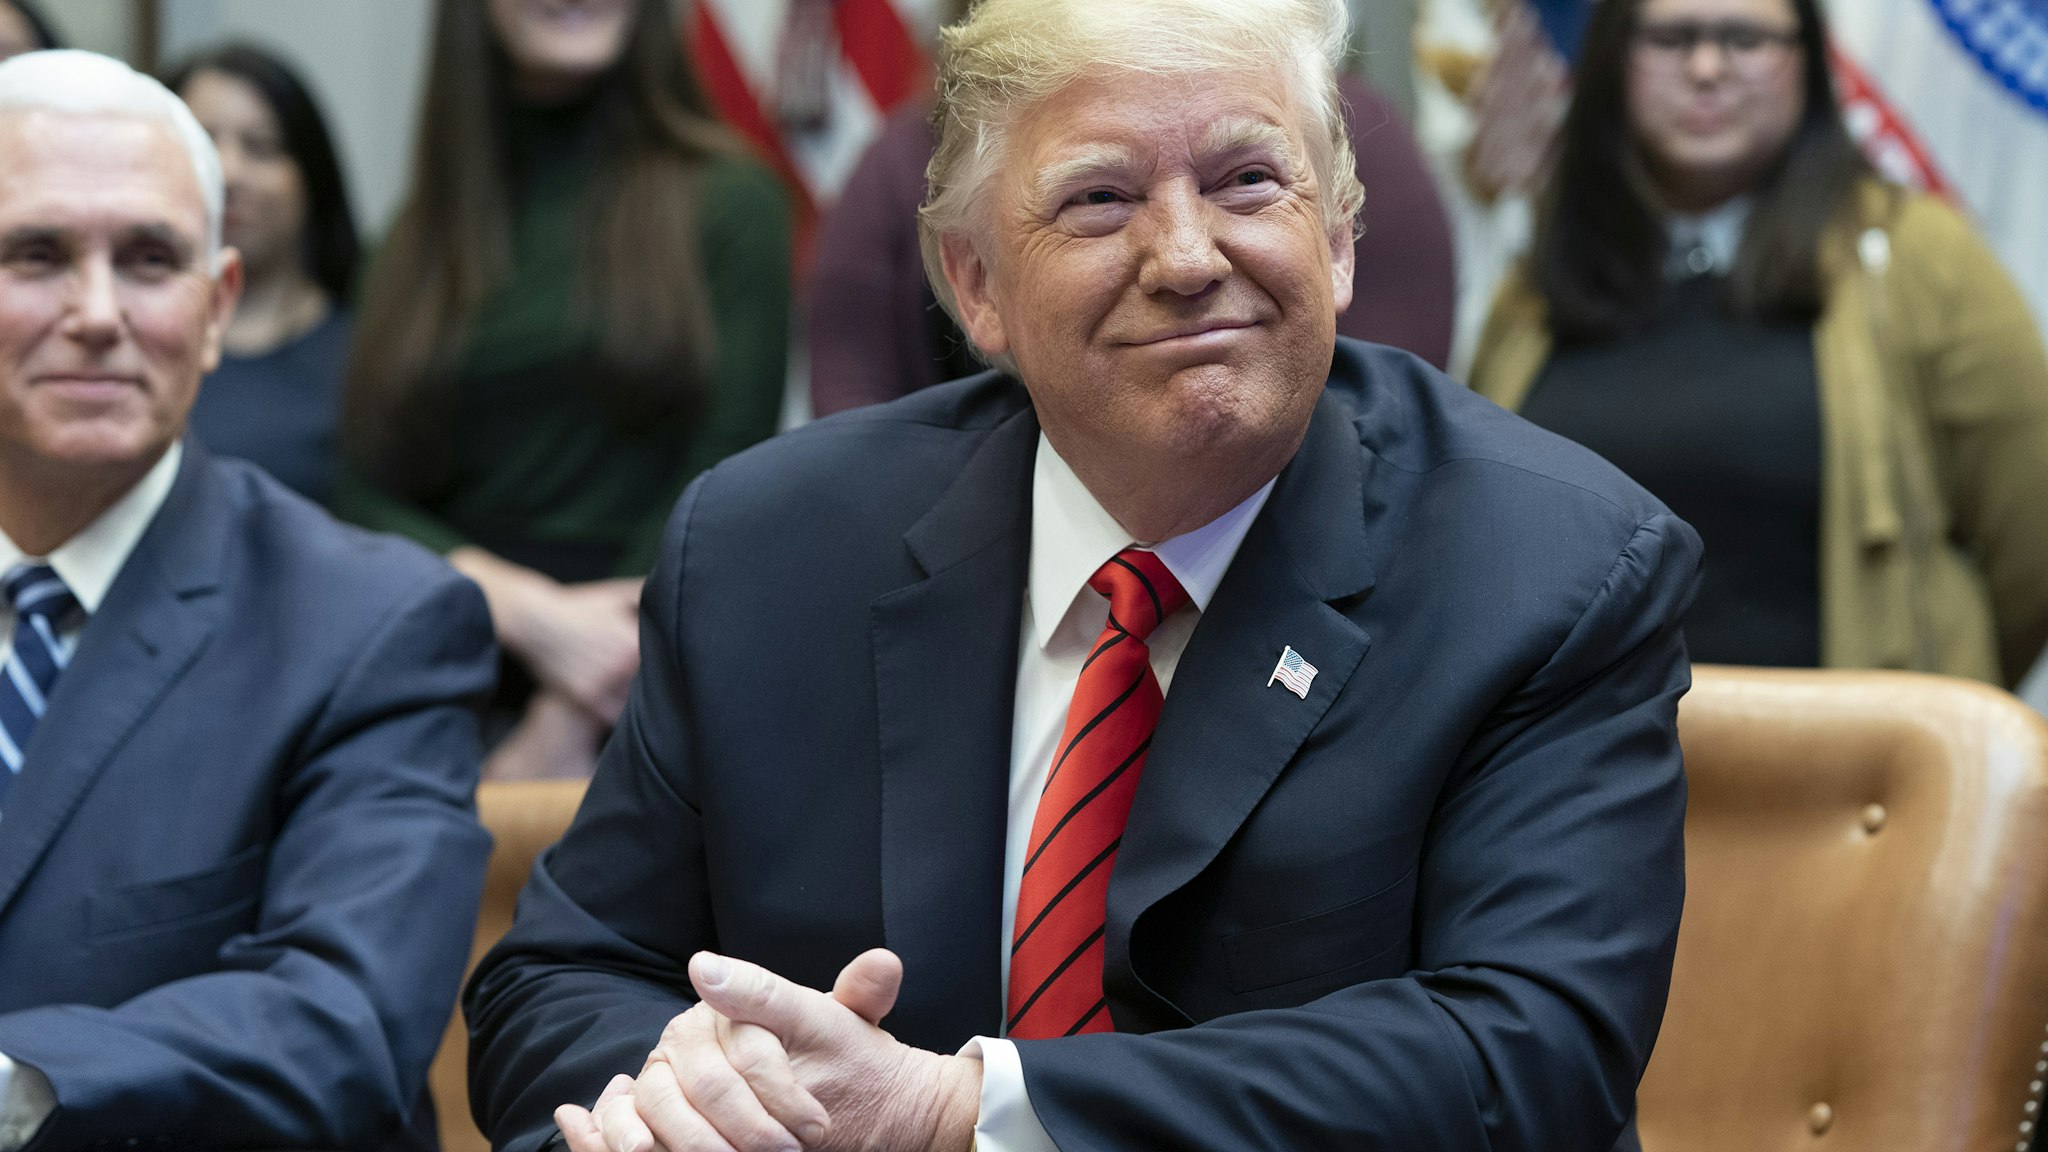 U.S. President Donald Trump smiles during a meeting at the White House in Washington, D.C., U.S., on Friday, Oct. 18, 2019. Trump gave a congratulatory call to National Aeronautics and Space Administration (NASA) astronauts Jessica Meir and Christina Koch after the first all-female spacewalk. Photographer: Chris Kleponis/Polaris/Bloomberg via Getty Images